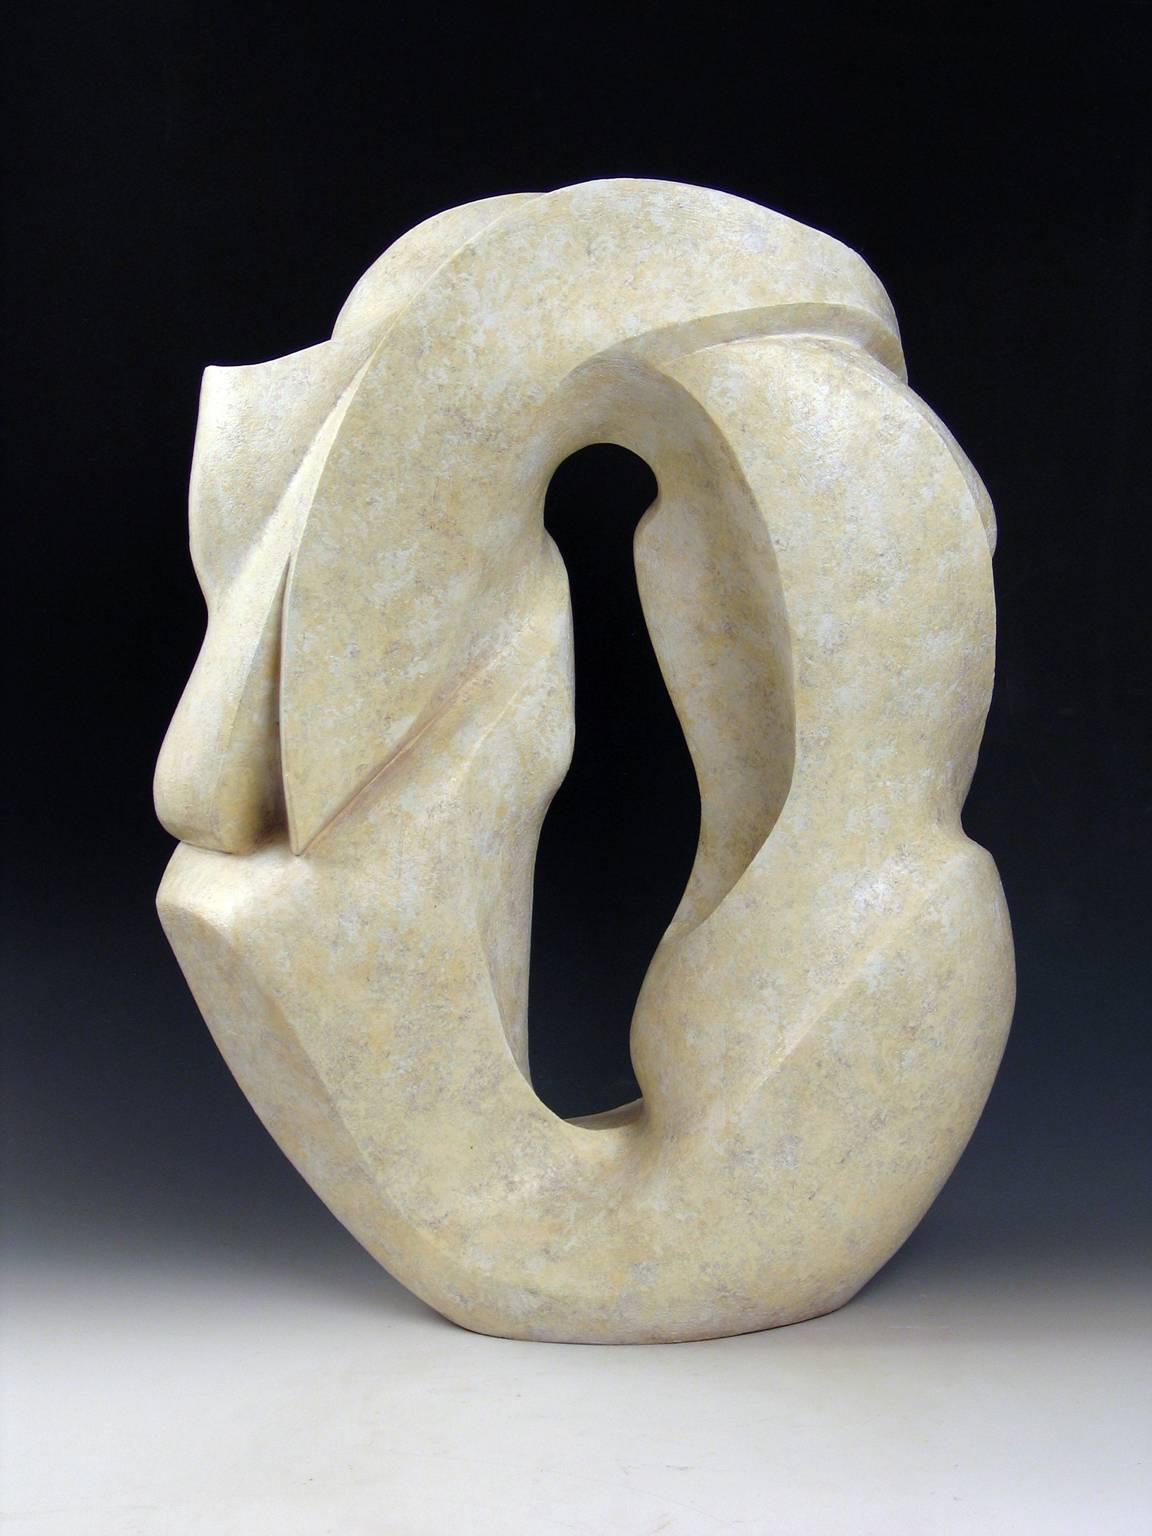 “The Source”, ceramic sculpture with a white acrylic finish, swirling movement - Sculpture by Elaine Lorenz